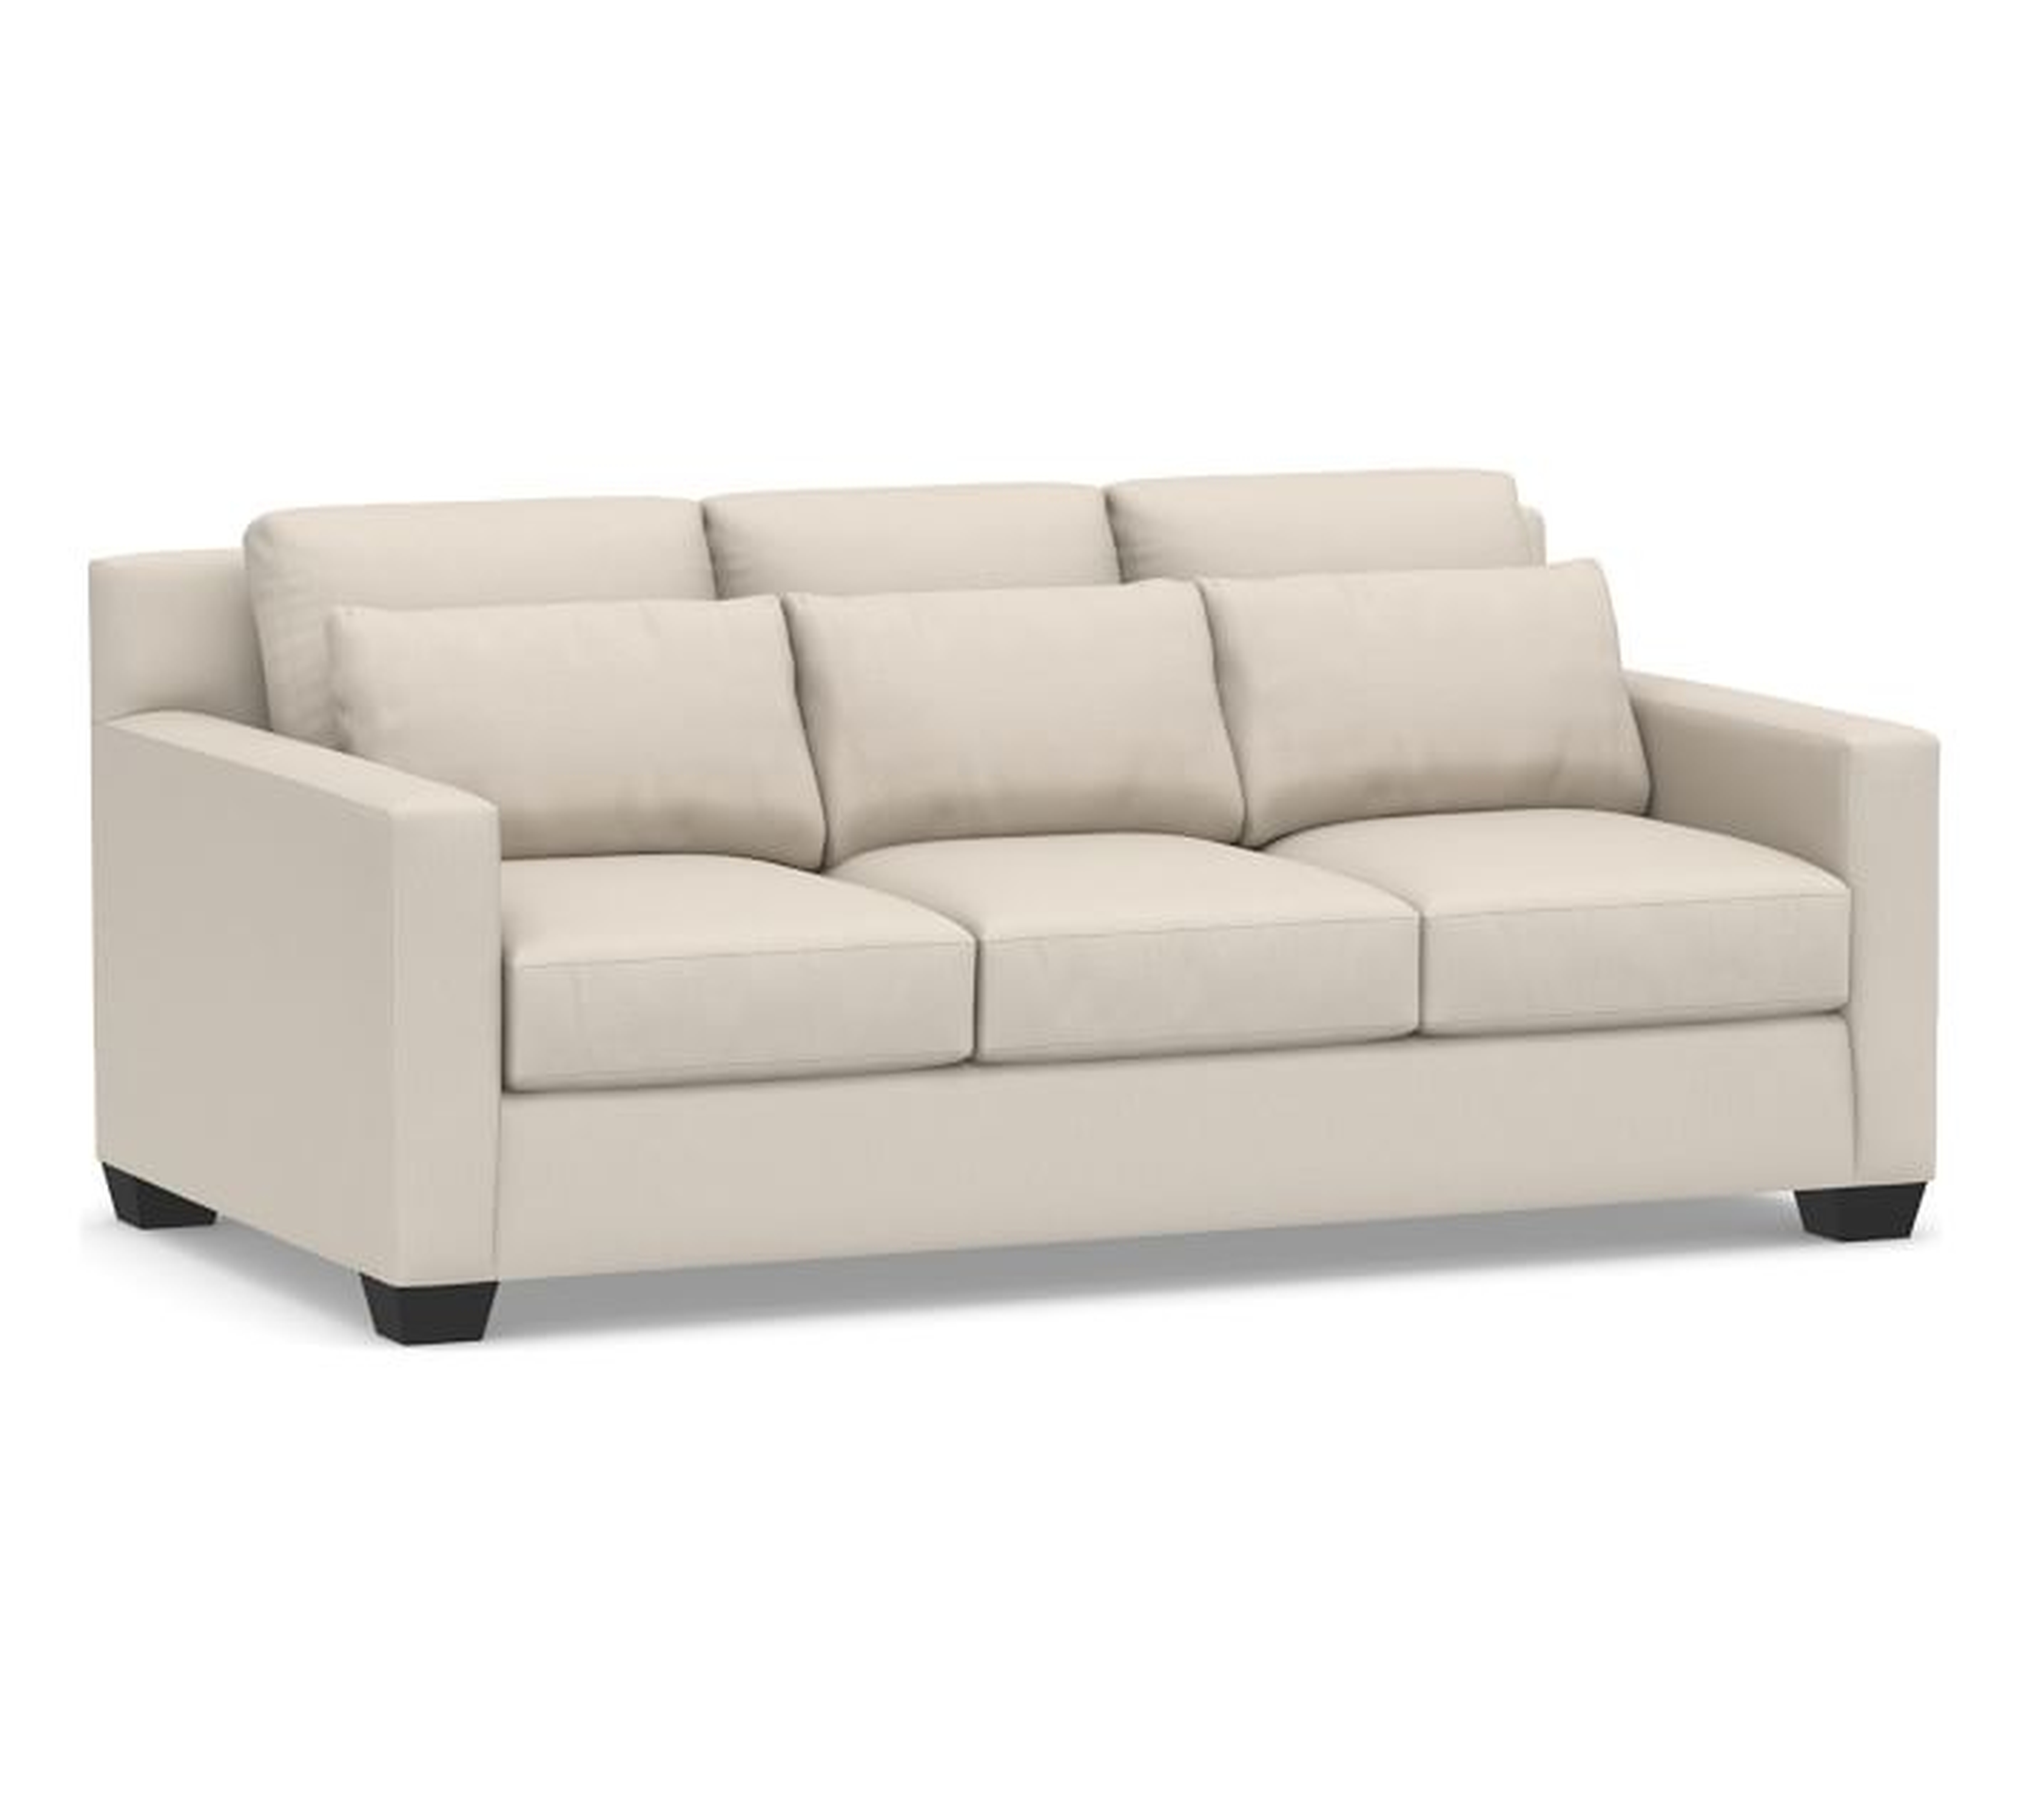 York Deep Seat Square Arm Upholstered Sofa 79", Down Blend Wrapped Cushions, Performance Brushed Basketweave Oatmeal - Pottery Barn